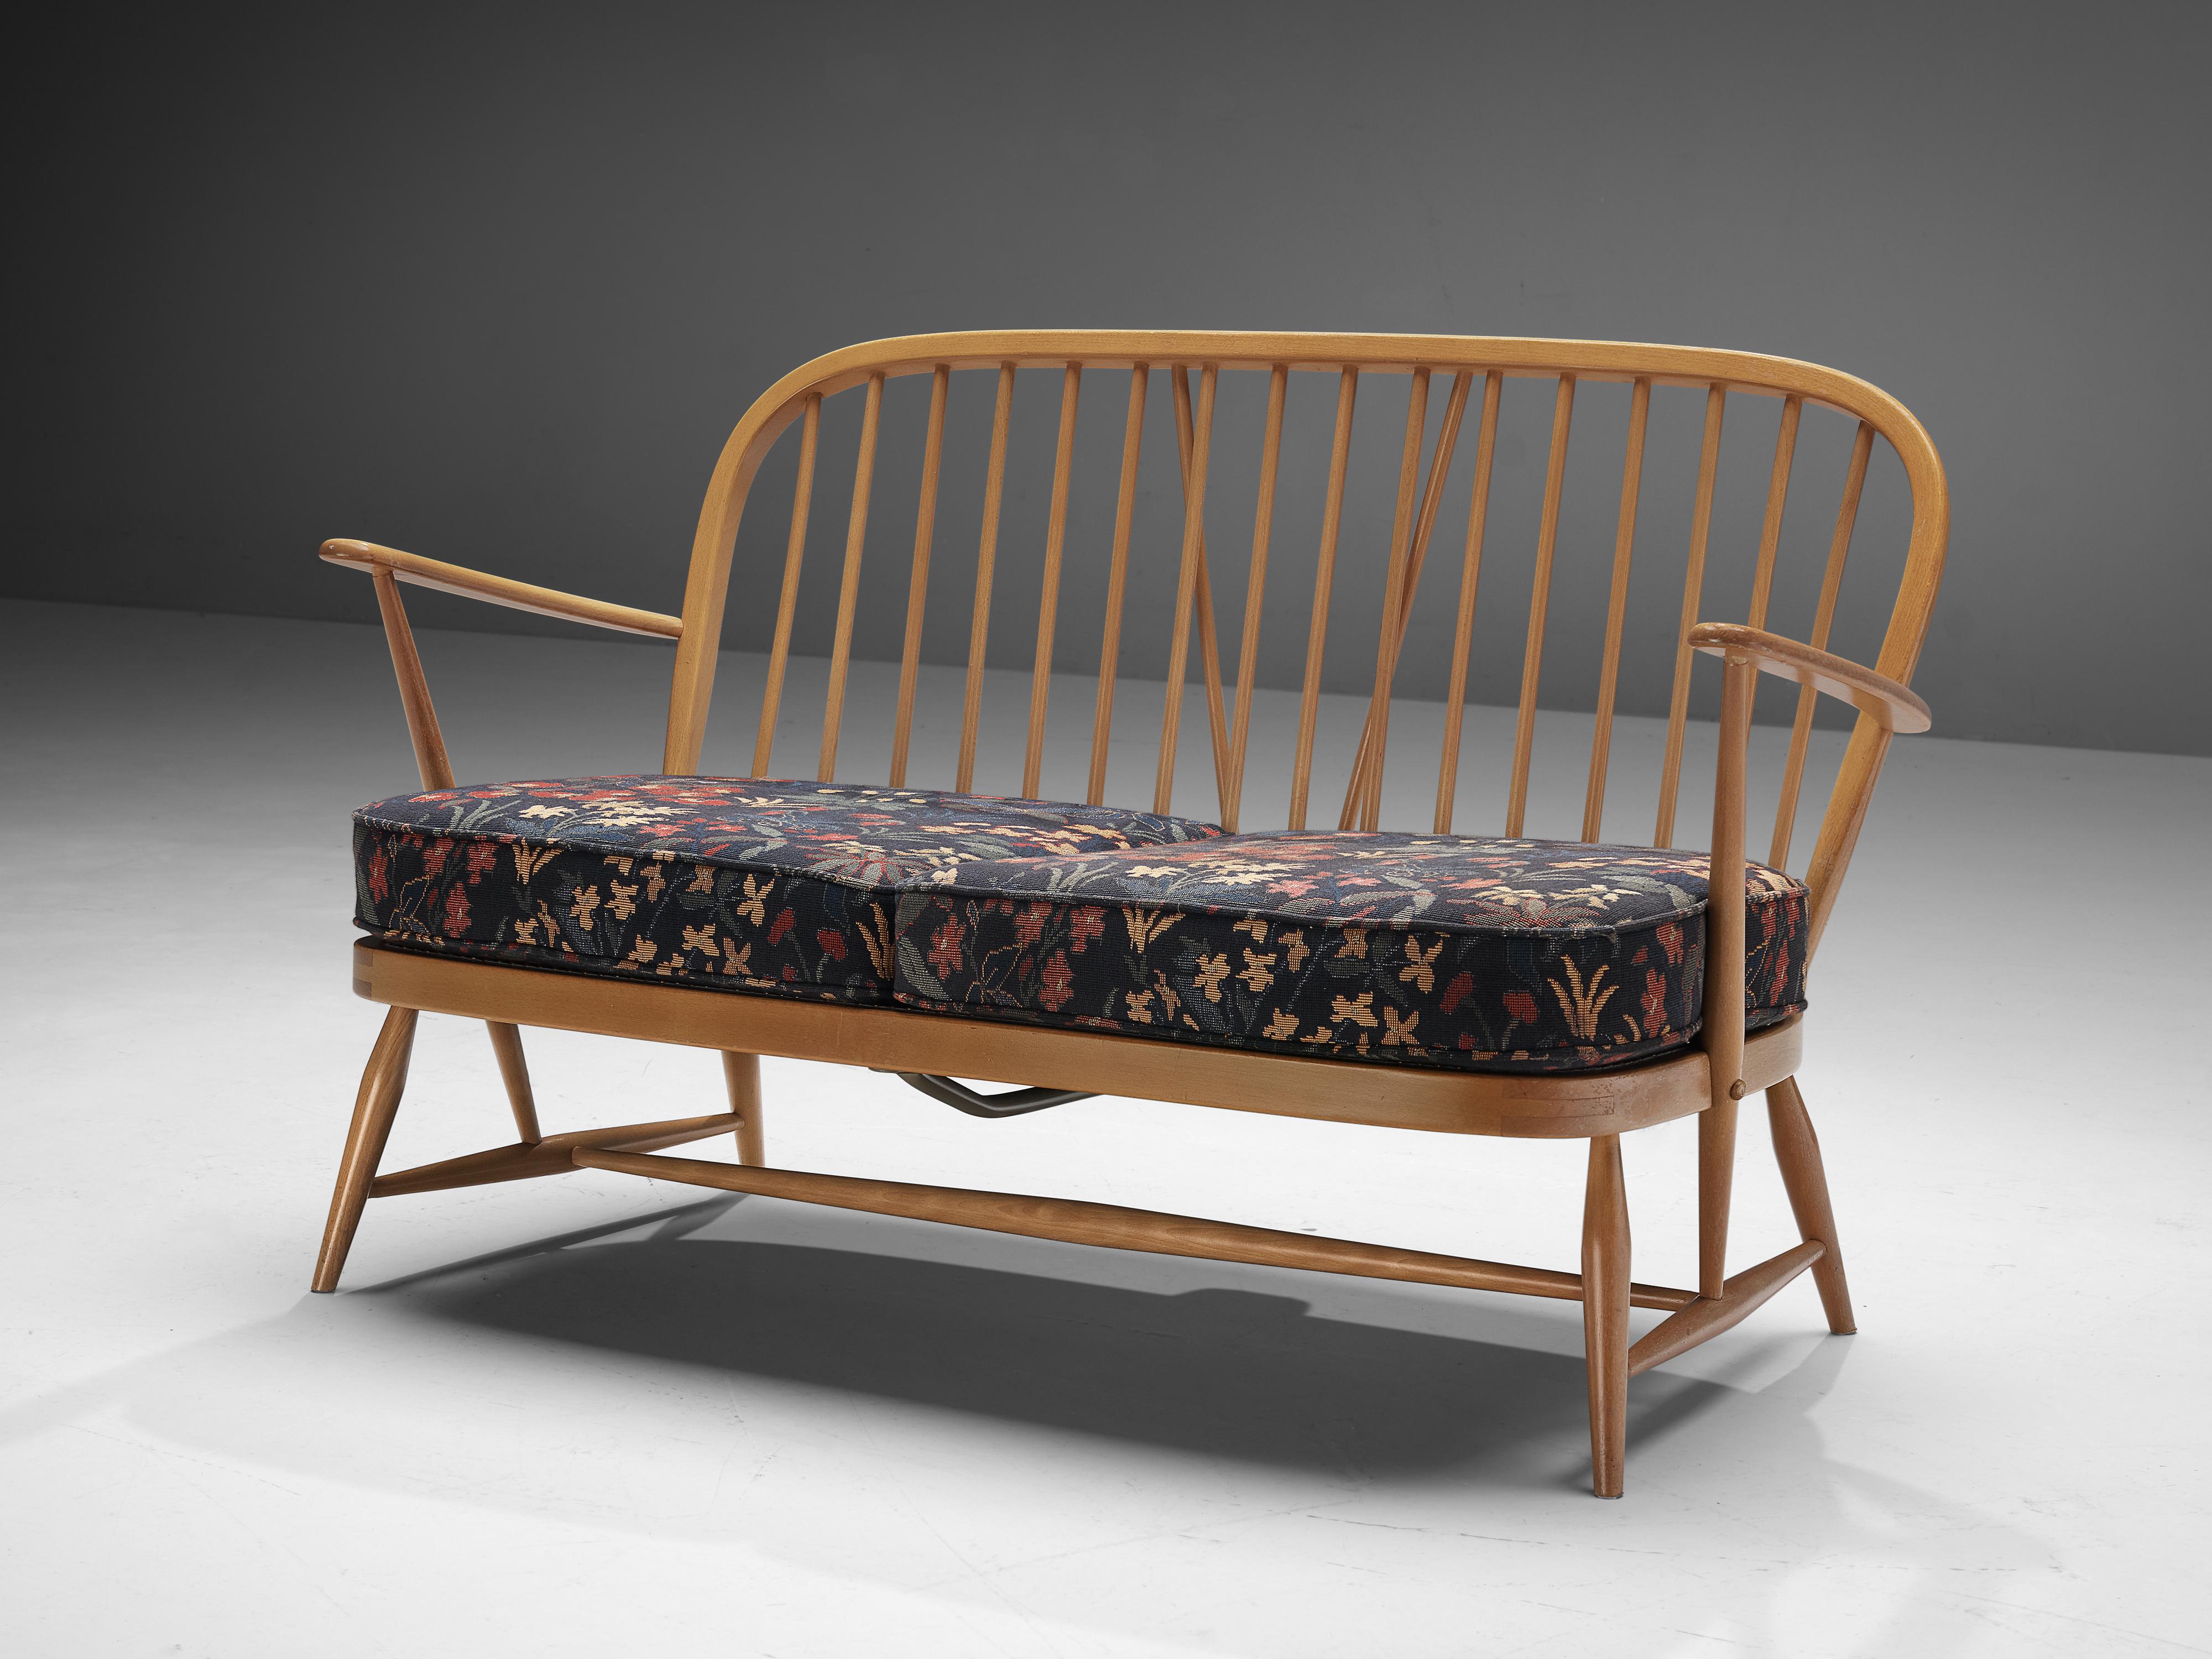 Lucian Ercolani for Ercol, ‘Windsor’ sofa, fabric and beech, United Kingdom, 1970s 

The Italian born English designer Lucian Ercolani designed the ‘Windsor’ sofa for his own company Ercol in the 1950s, although this particular sofa dates from the